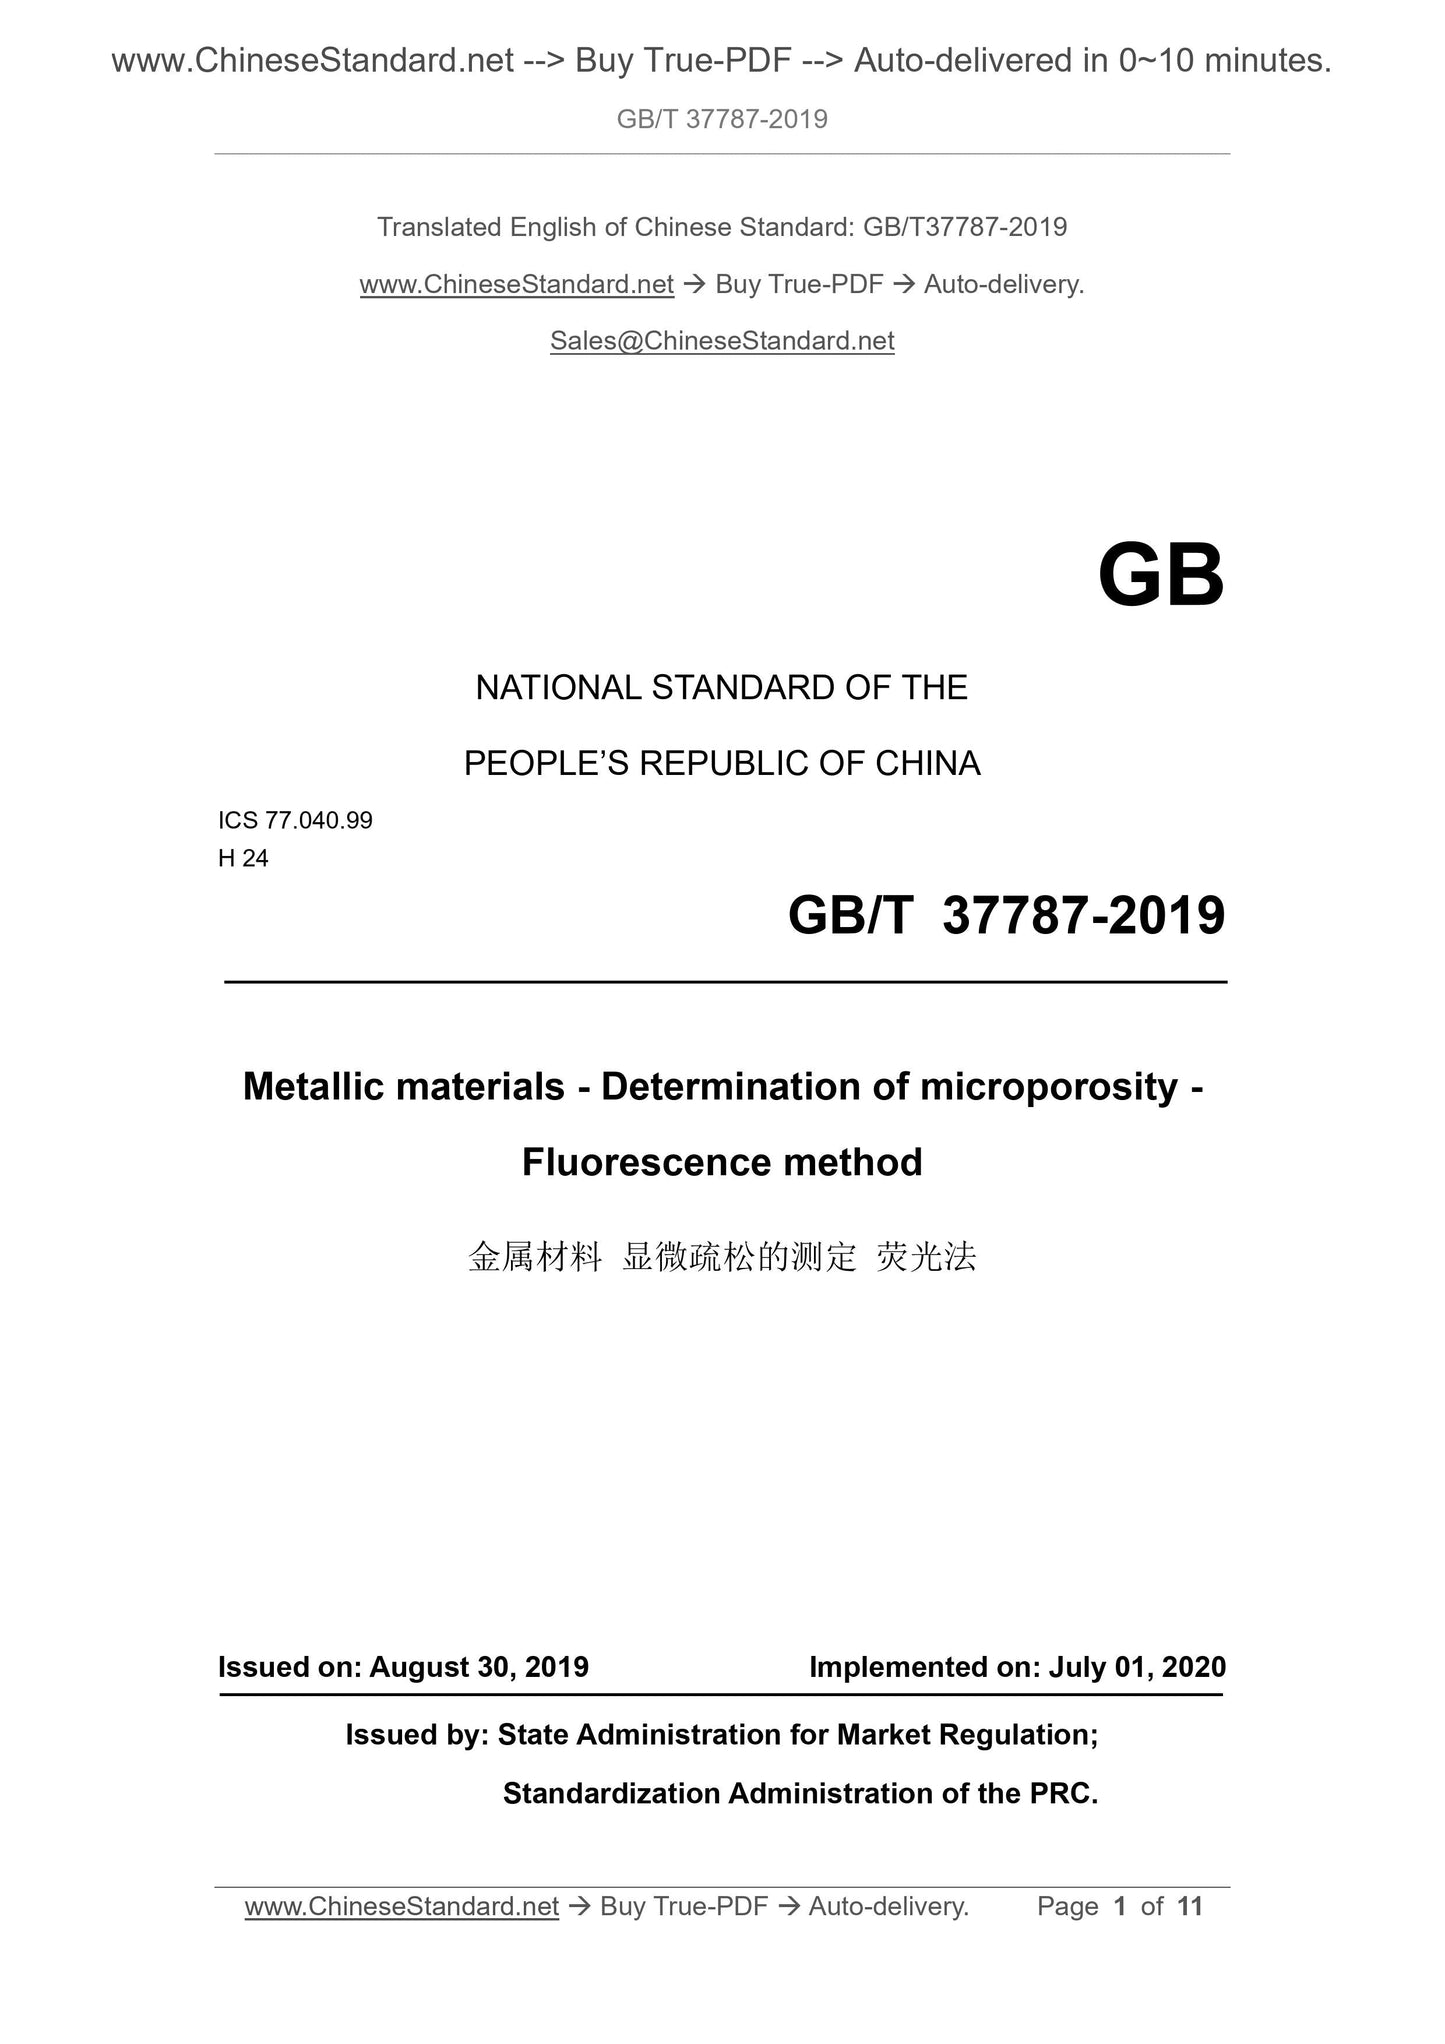 GB/T 37787-2019 Page 1